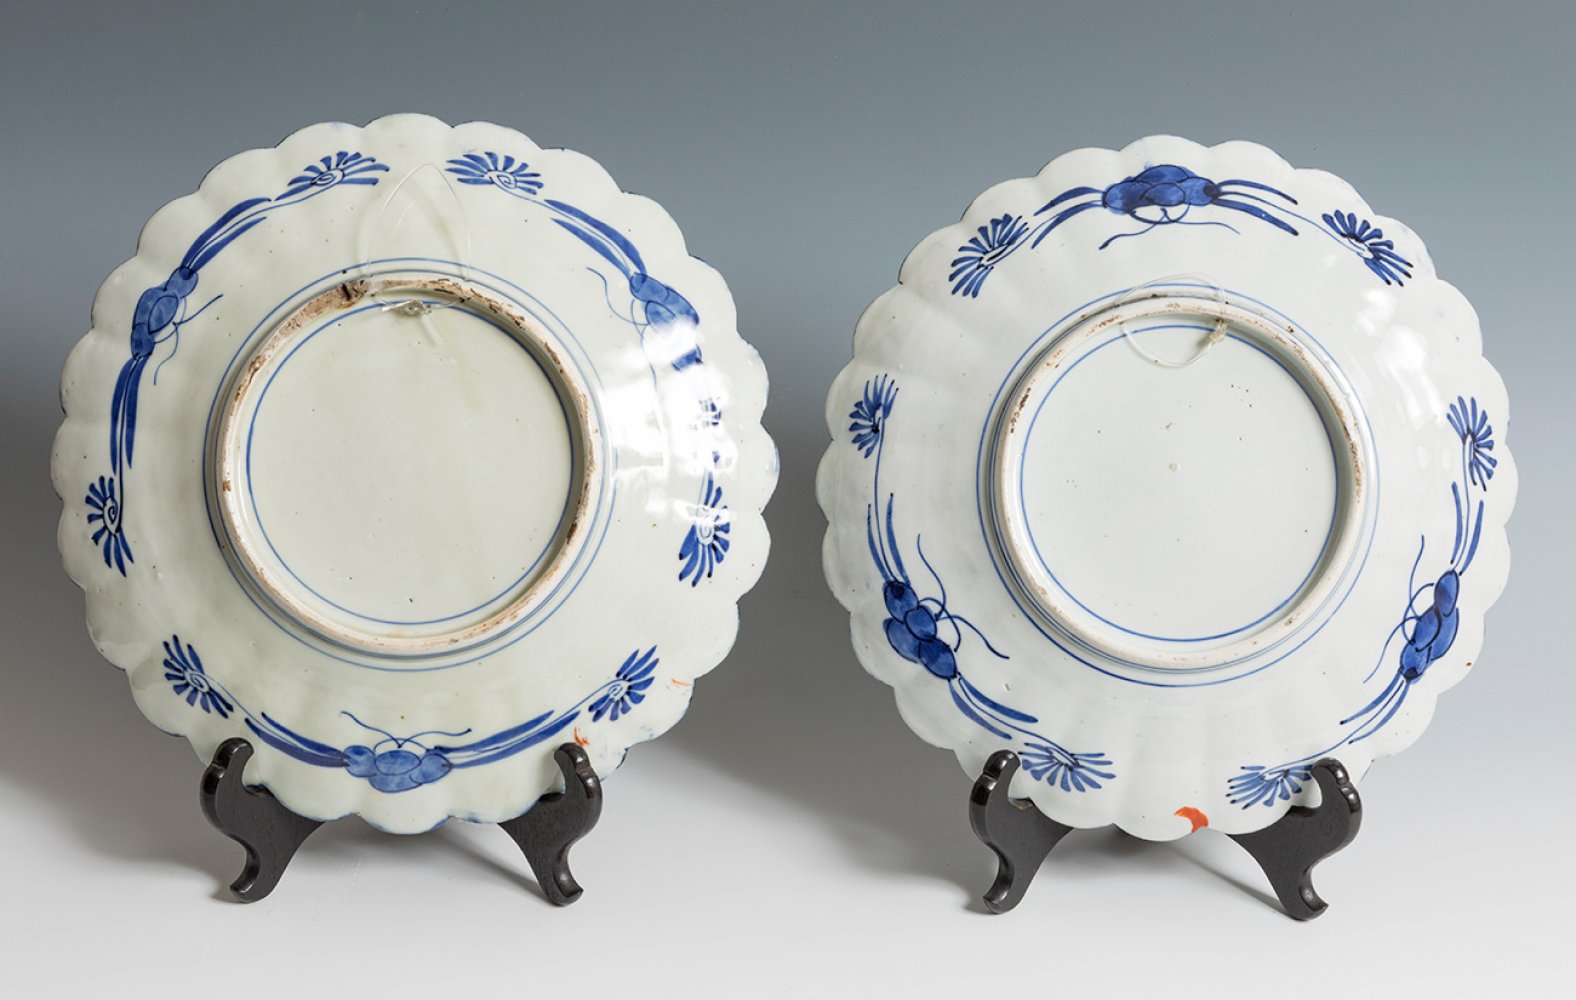 Two Imari-style dishes. Japan, 20th century.Glazed porcelain.Measurements: 30 cm in diameter.Pair of - Image 3 of 3